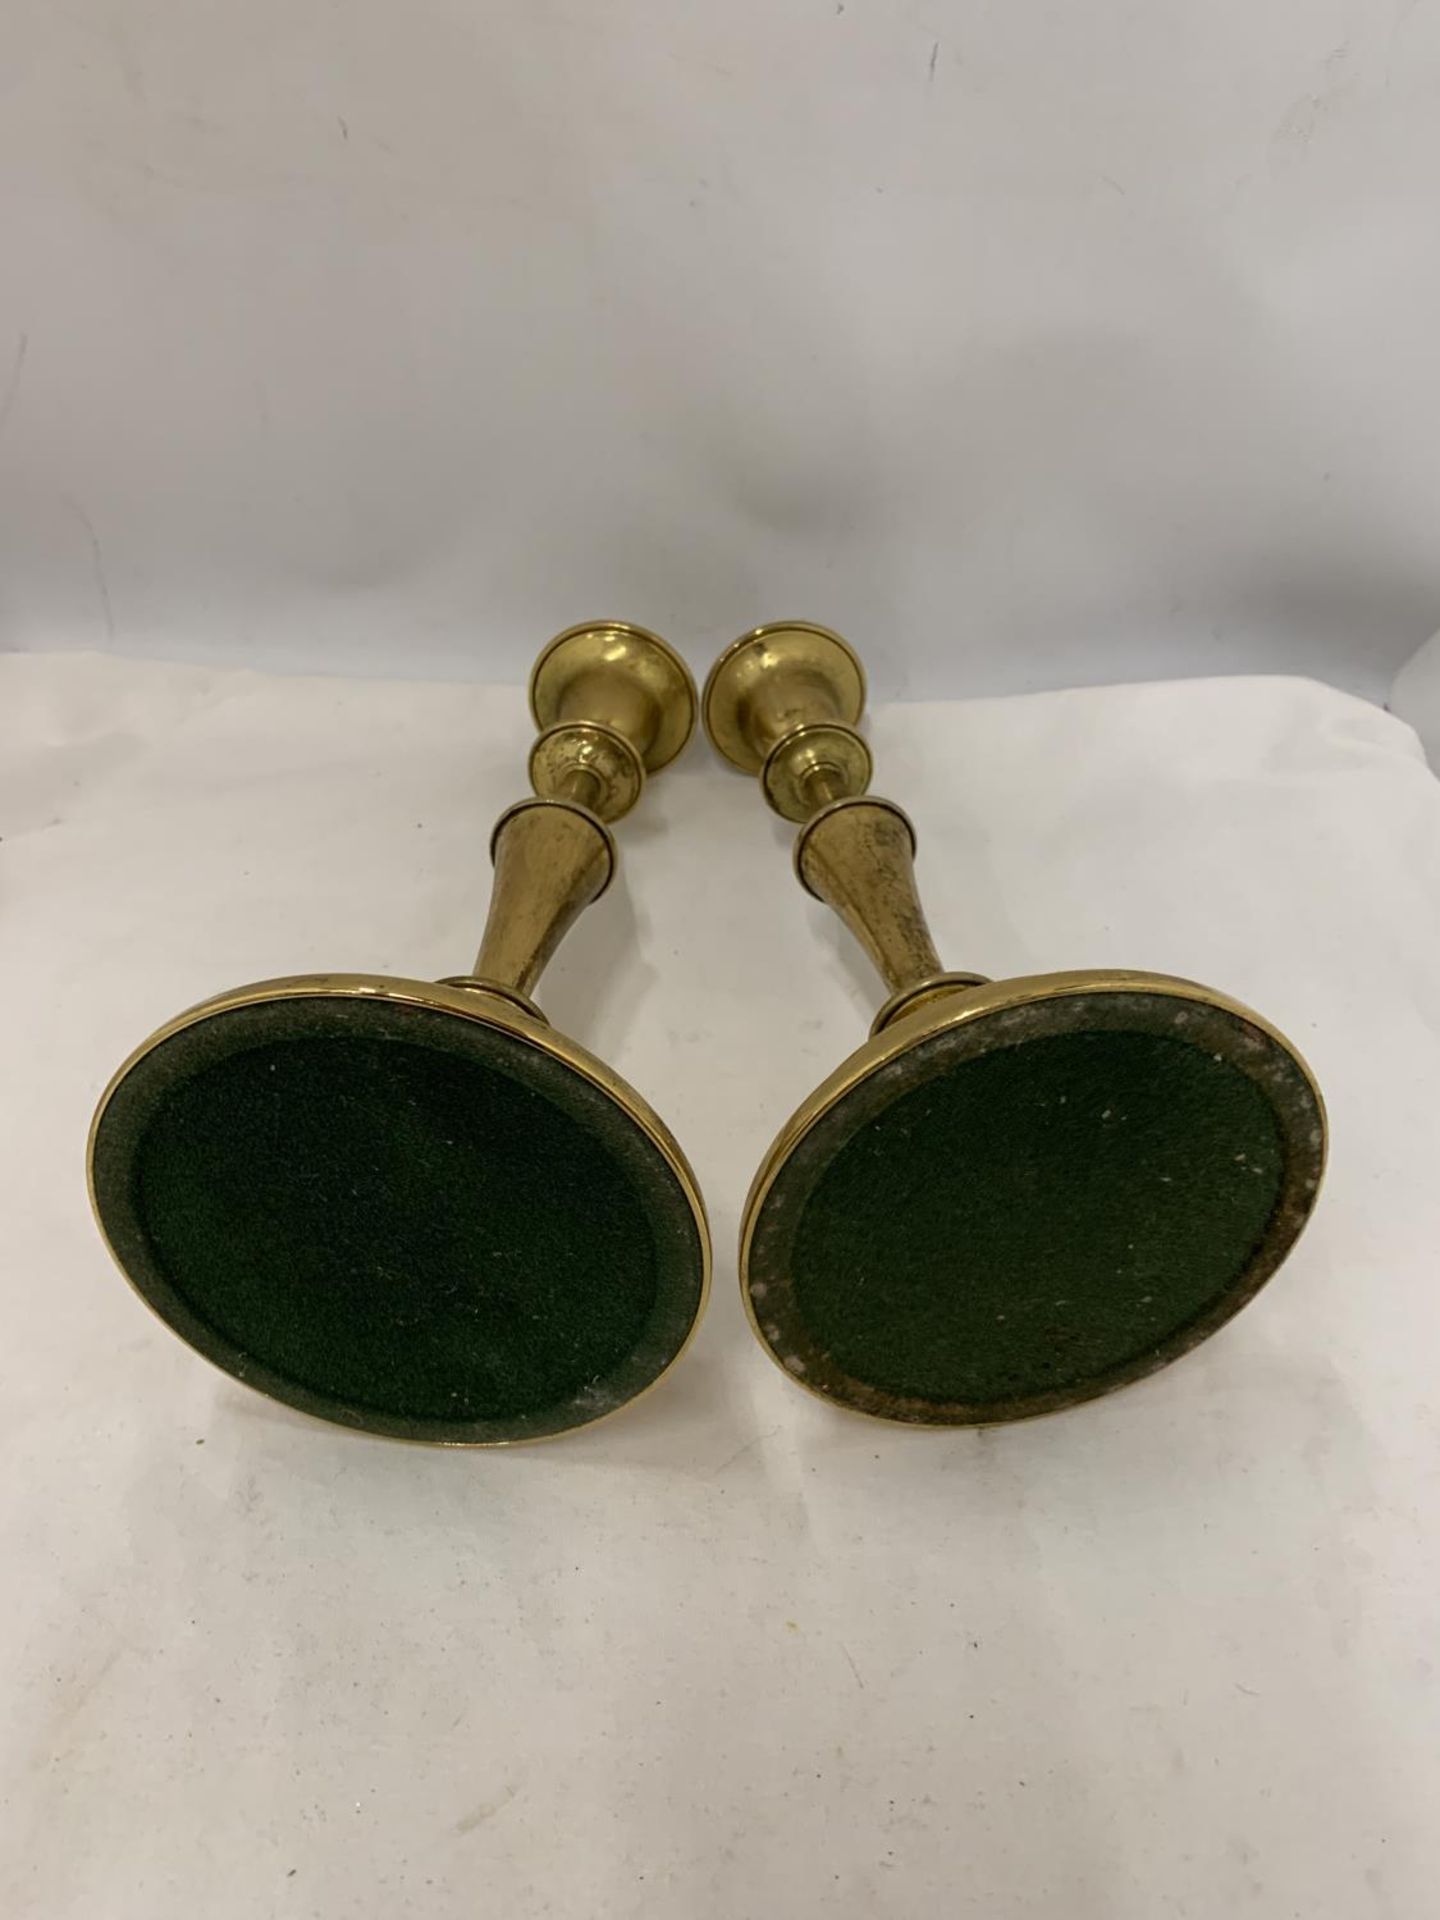 TWO LARGE BRASS CANDLESTICKS 27 CM - Image 2 of 3